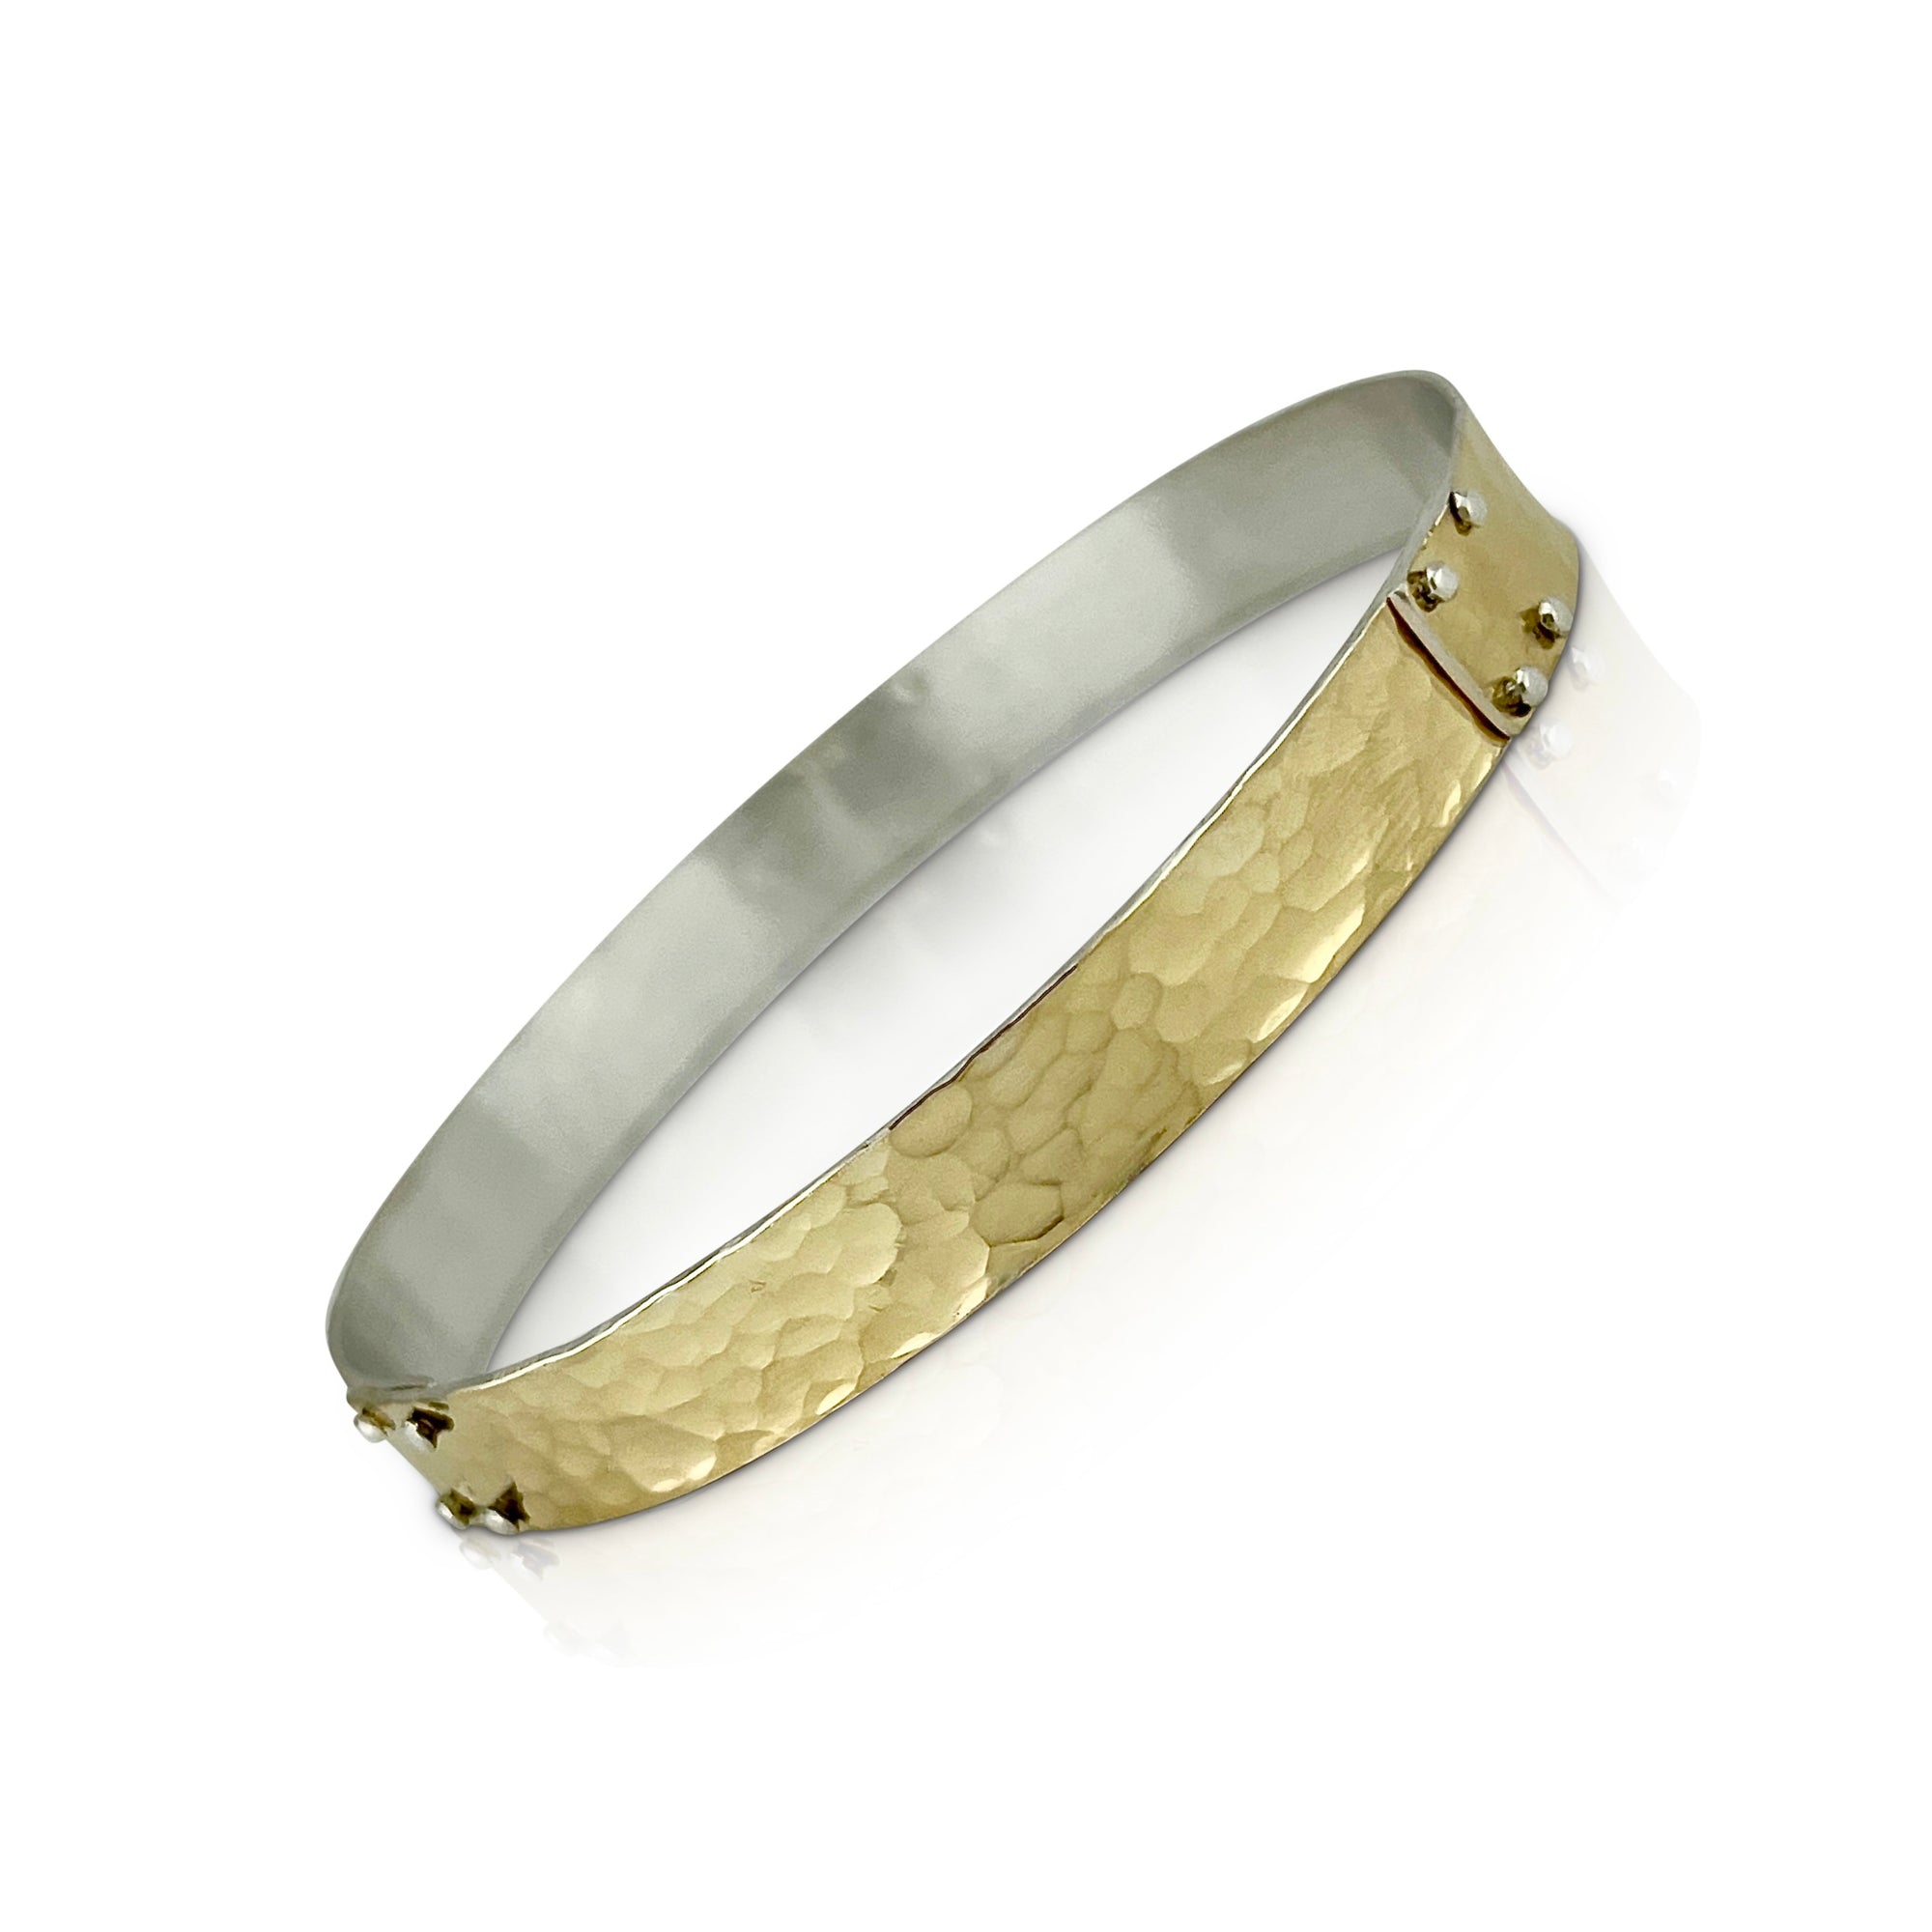 Hand forged with three sections of rivets spaced evenly around the bangle.  Wear it by itself or stack with others.  18K yellow gold and sterling silver bi-metal bangle by Ayesha Mayadas